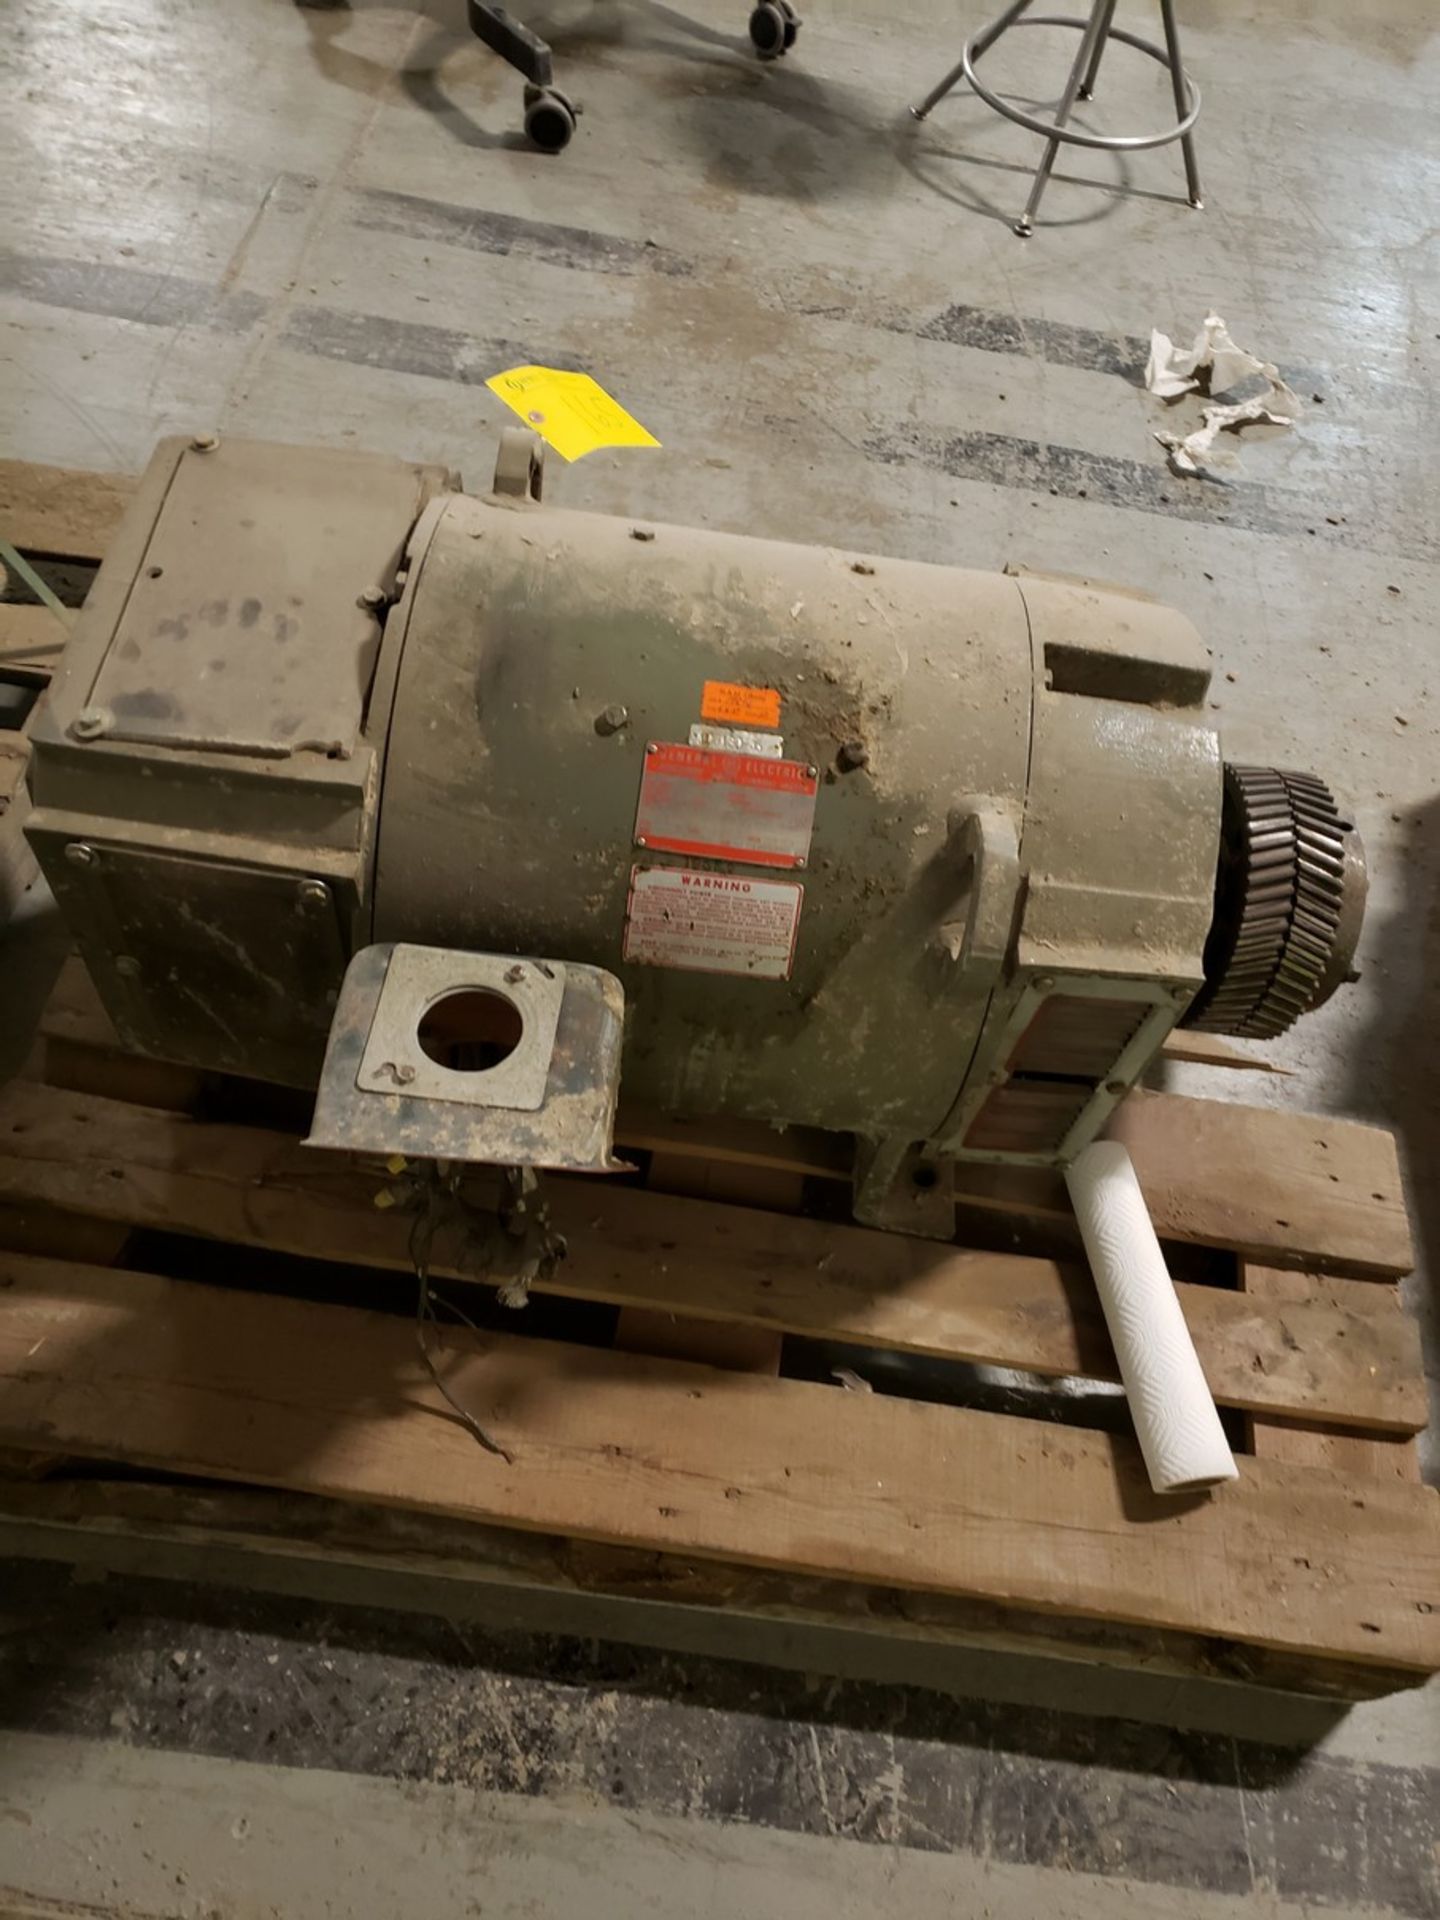 PALLET OF 1 GENERAL ELECTRIC 500 VOLT DC MOTOR 100 HP, 1750 RPM, CONDITION UN KNOWN (POLY STORAGE